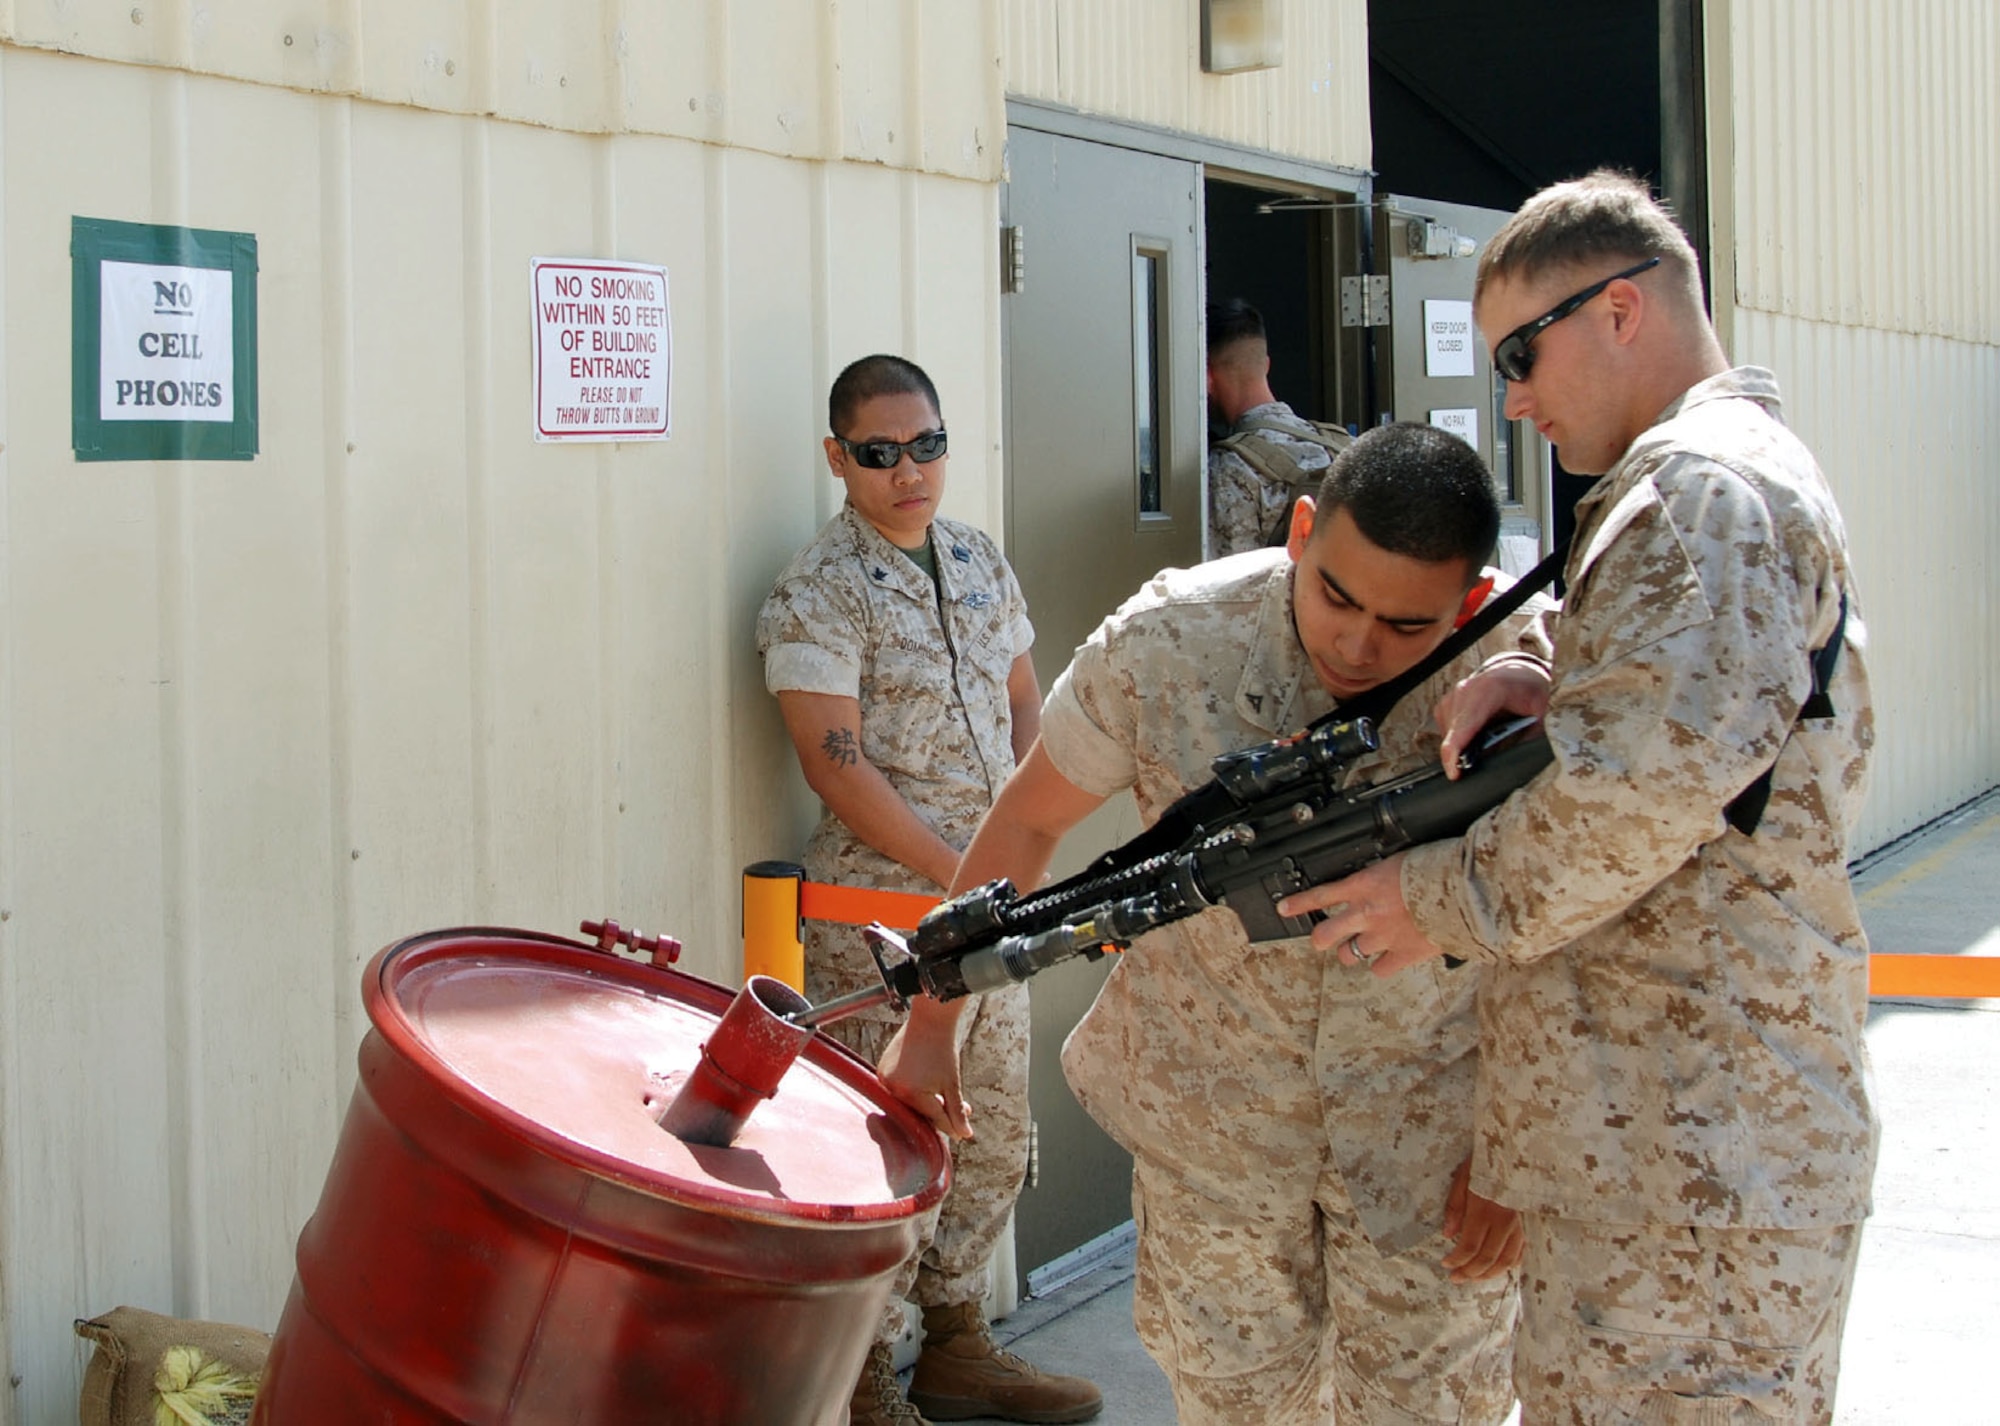 A/DACG Marine Corps Lance Cpl Julian Gonzalez checks the barrel of a Marine’s M-16/A4 March 26 while Navy Petty Officer 2nd Class Jonathan Domingo, also with the A/DACG, looks on. Corporal Gonzalez visually inspects the barrel of every weapon carried into the deployment hangar at March ARB. (U.S. Air Force photo by Megan Just)